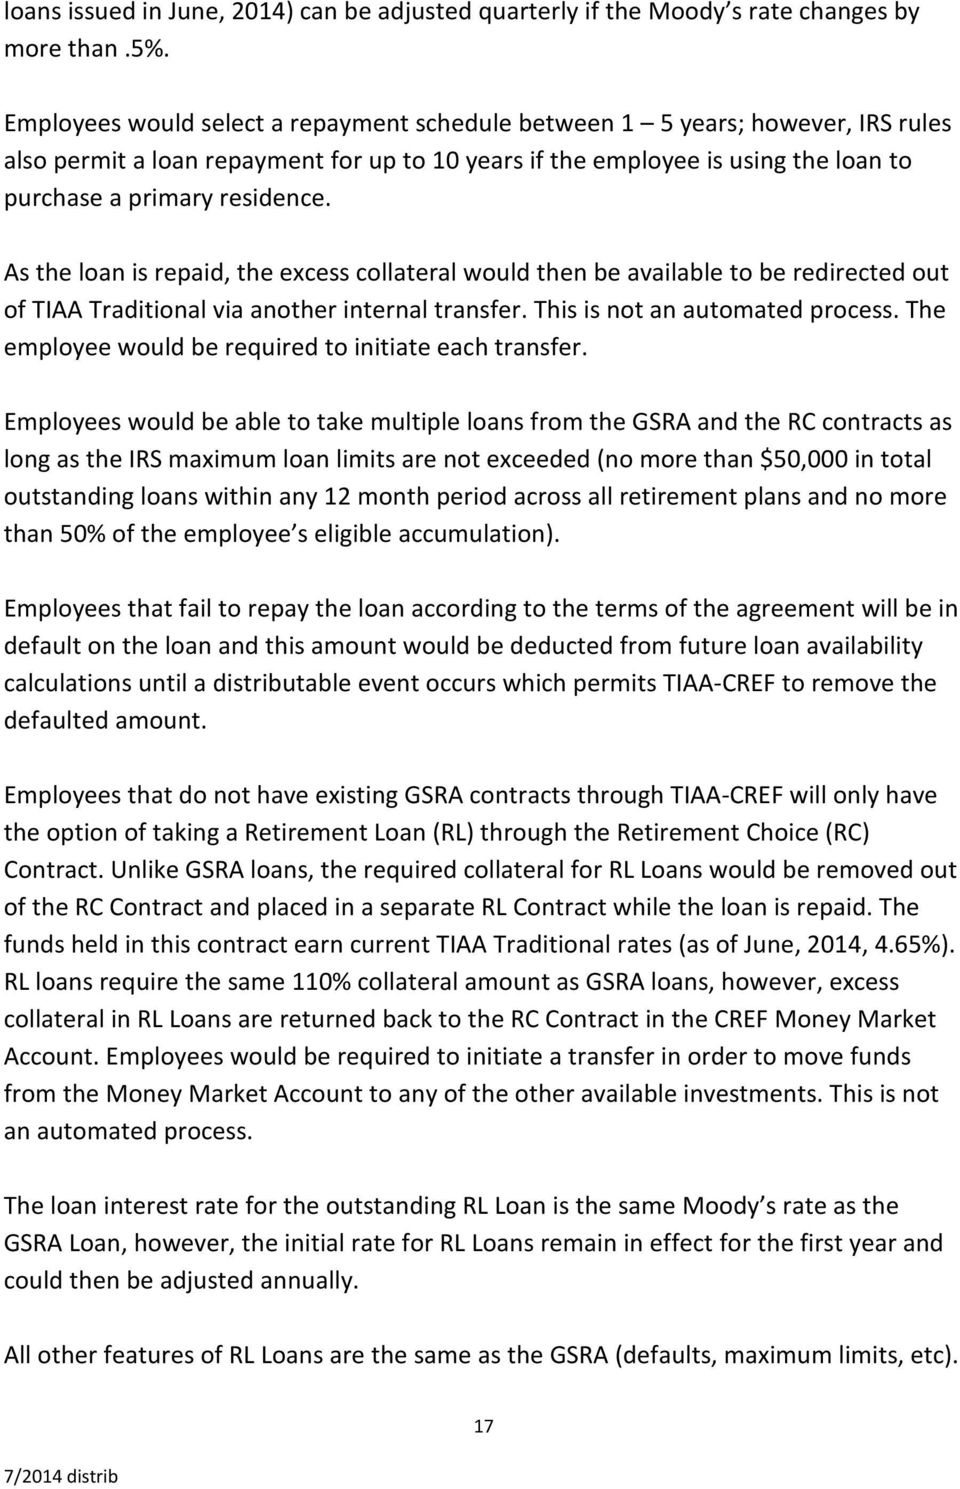 As the loan is repaid, the excess collateral would then be available to be redirected out of TIAA Traditional via another internal transfer. This is not an automated process.